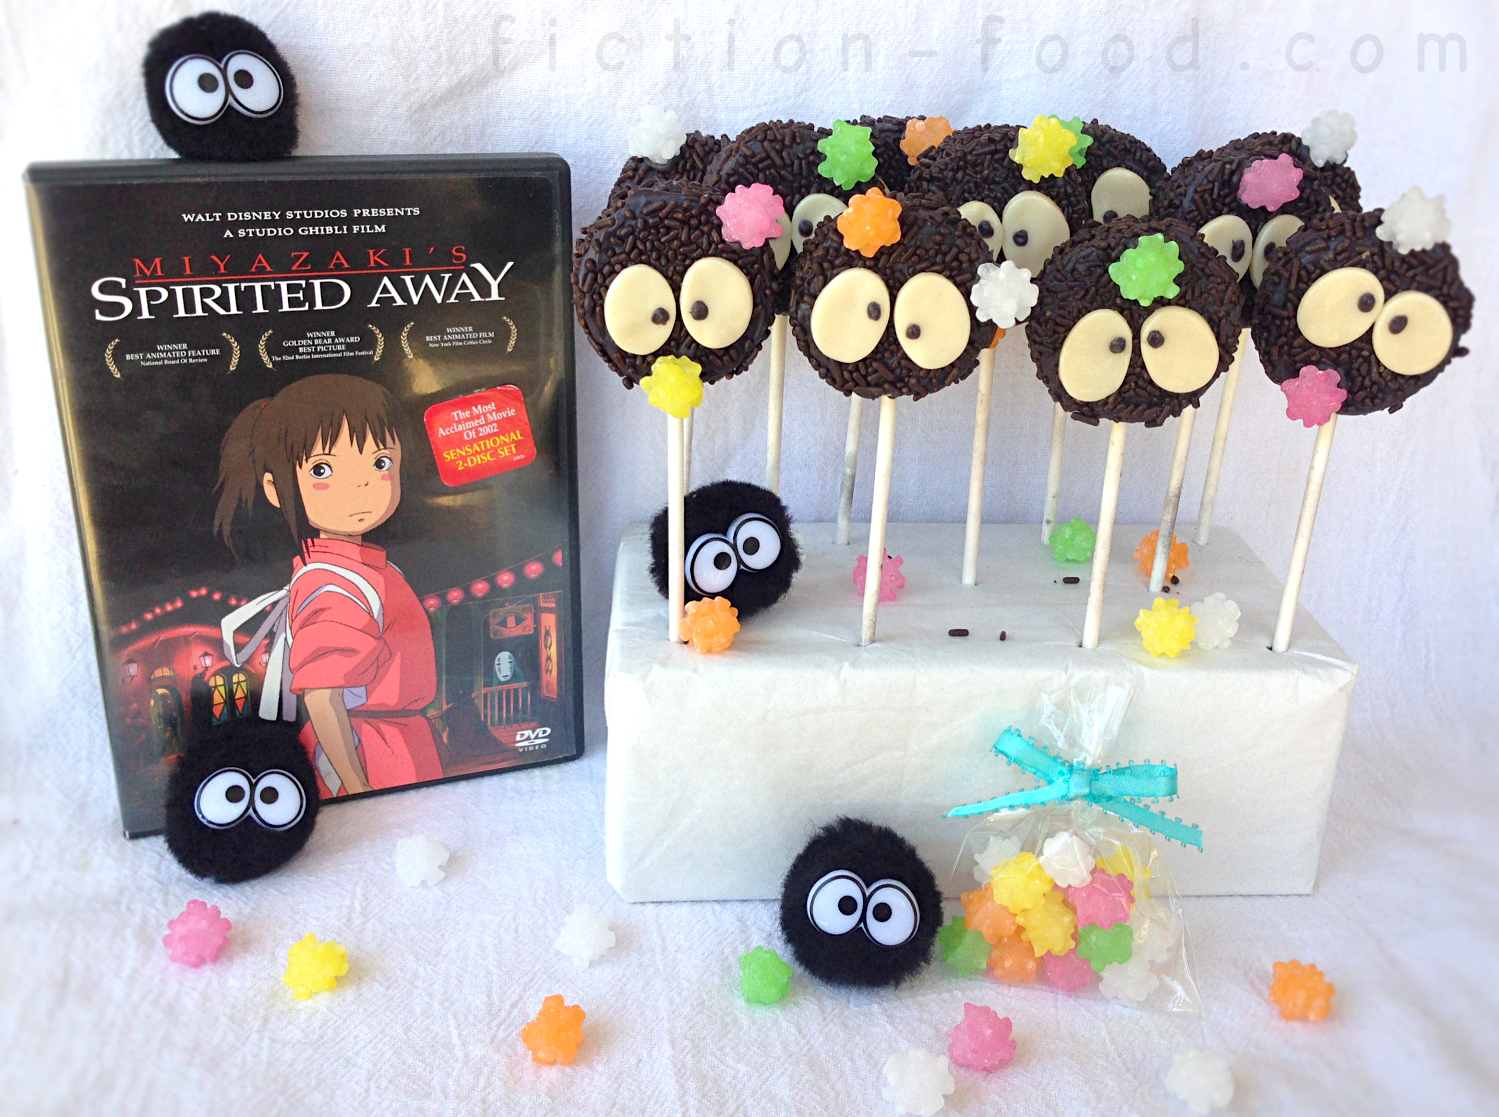 Fiction-Food Café: Soot Sprite Cookie Pops | Spirited Away & Totoro